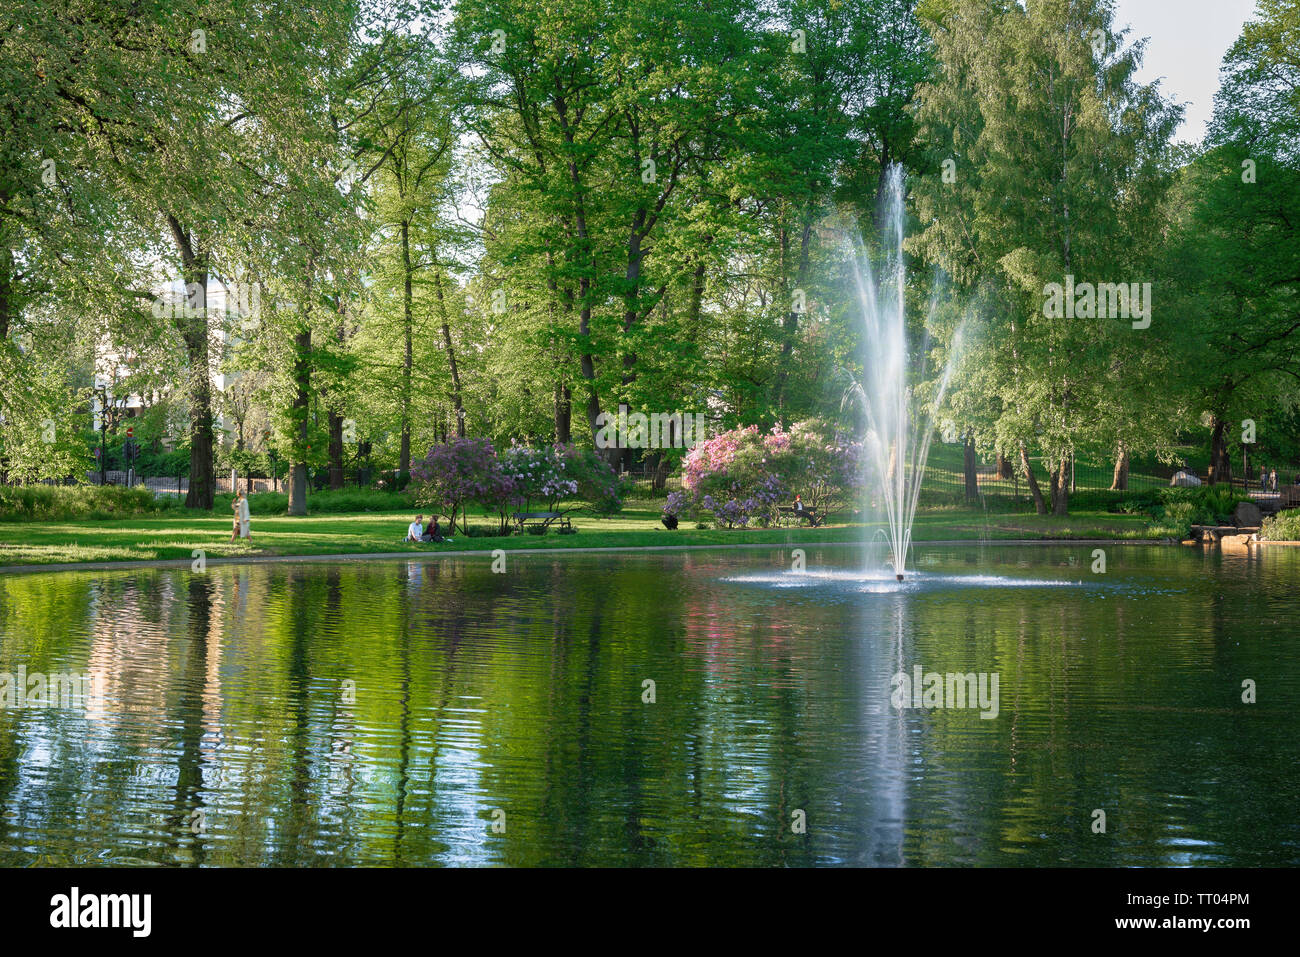 Slottsparken Oslo, view in summer of the lake in the Royal Palace park (Slottsparken) in Oslo city center, Norway. Stock Photo